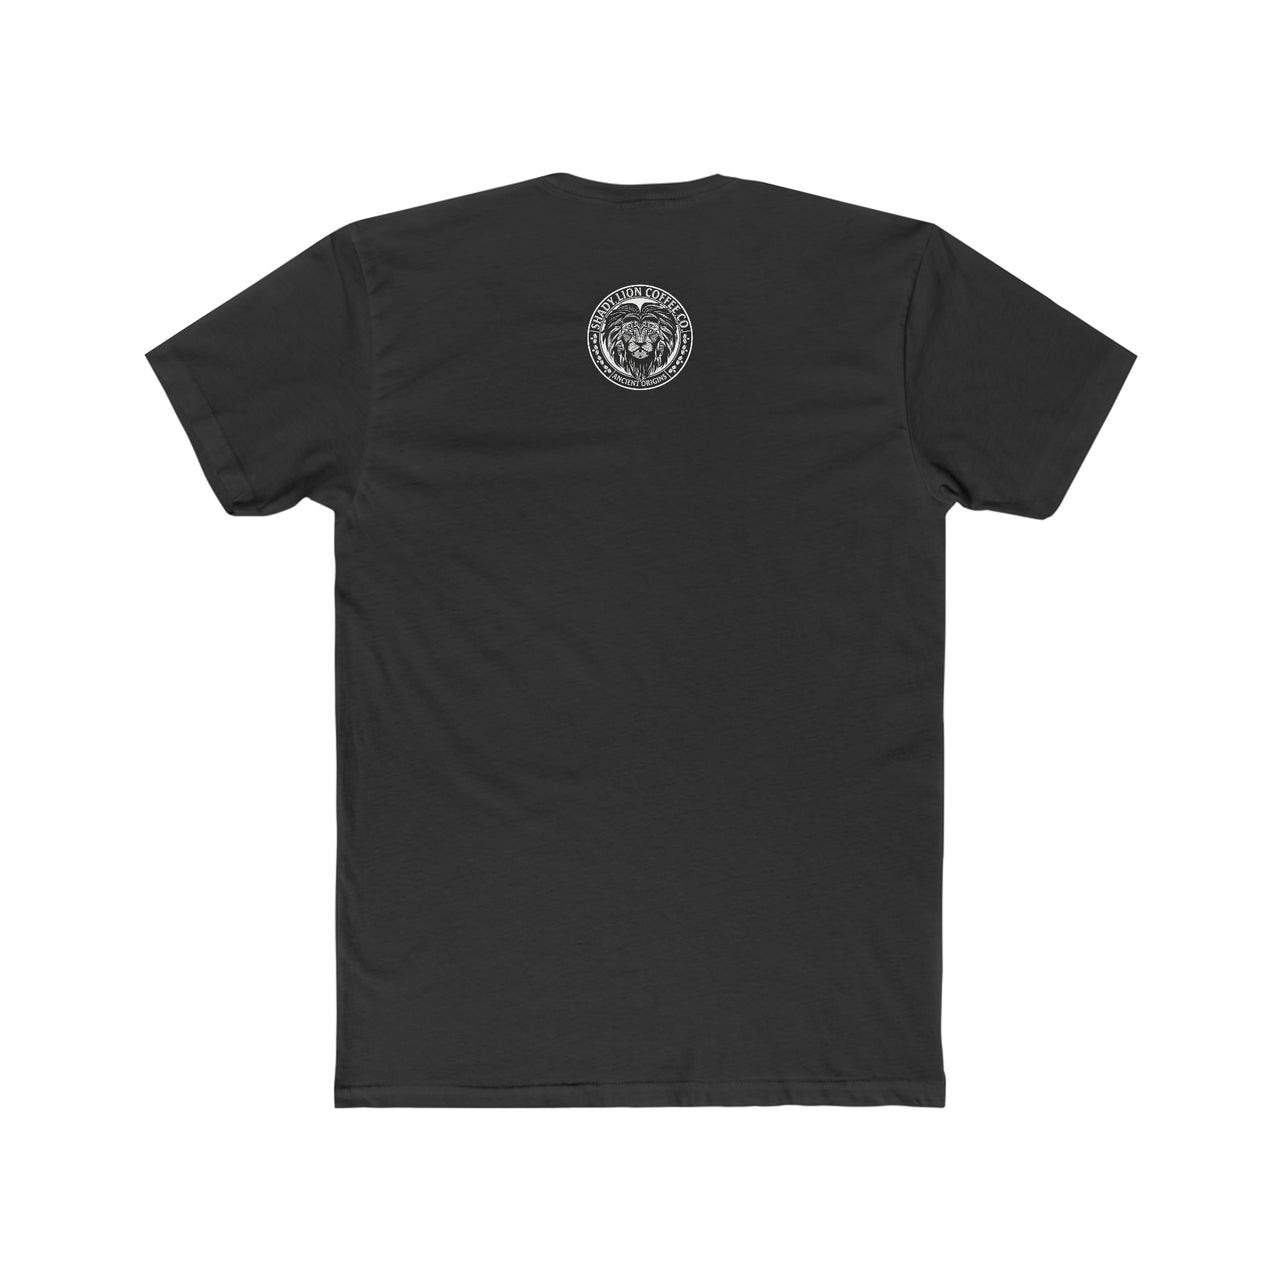 Mr. Cool Beans Unisex Cotton Crew Tee - Shady Lion Coffee Co.